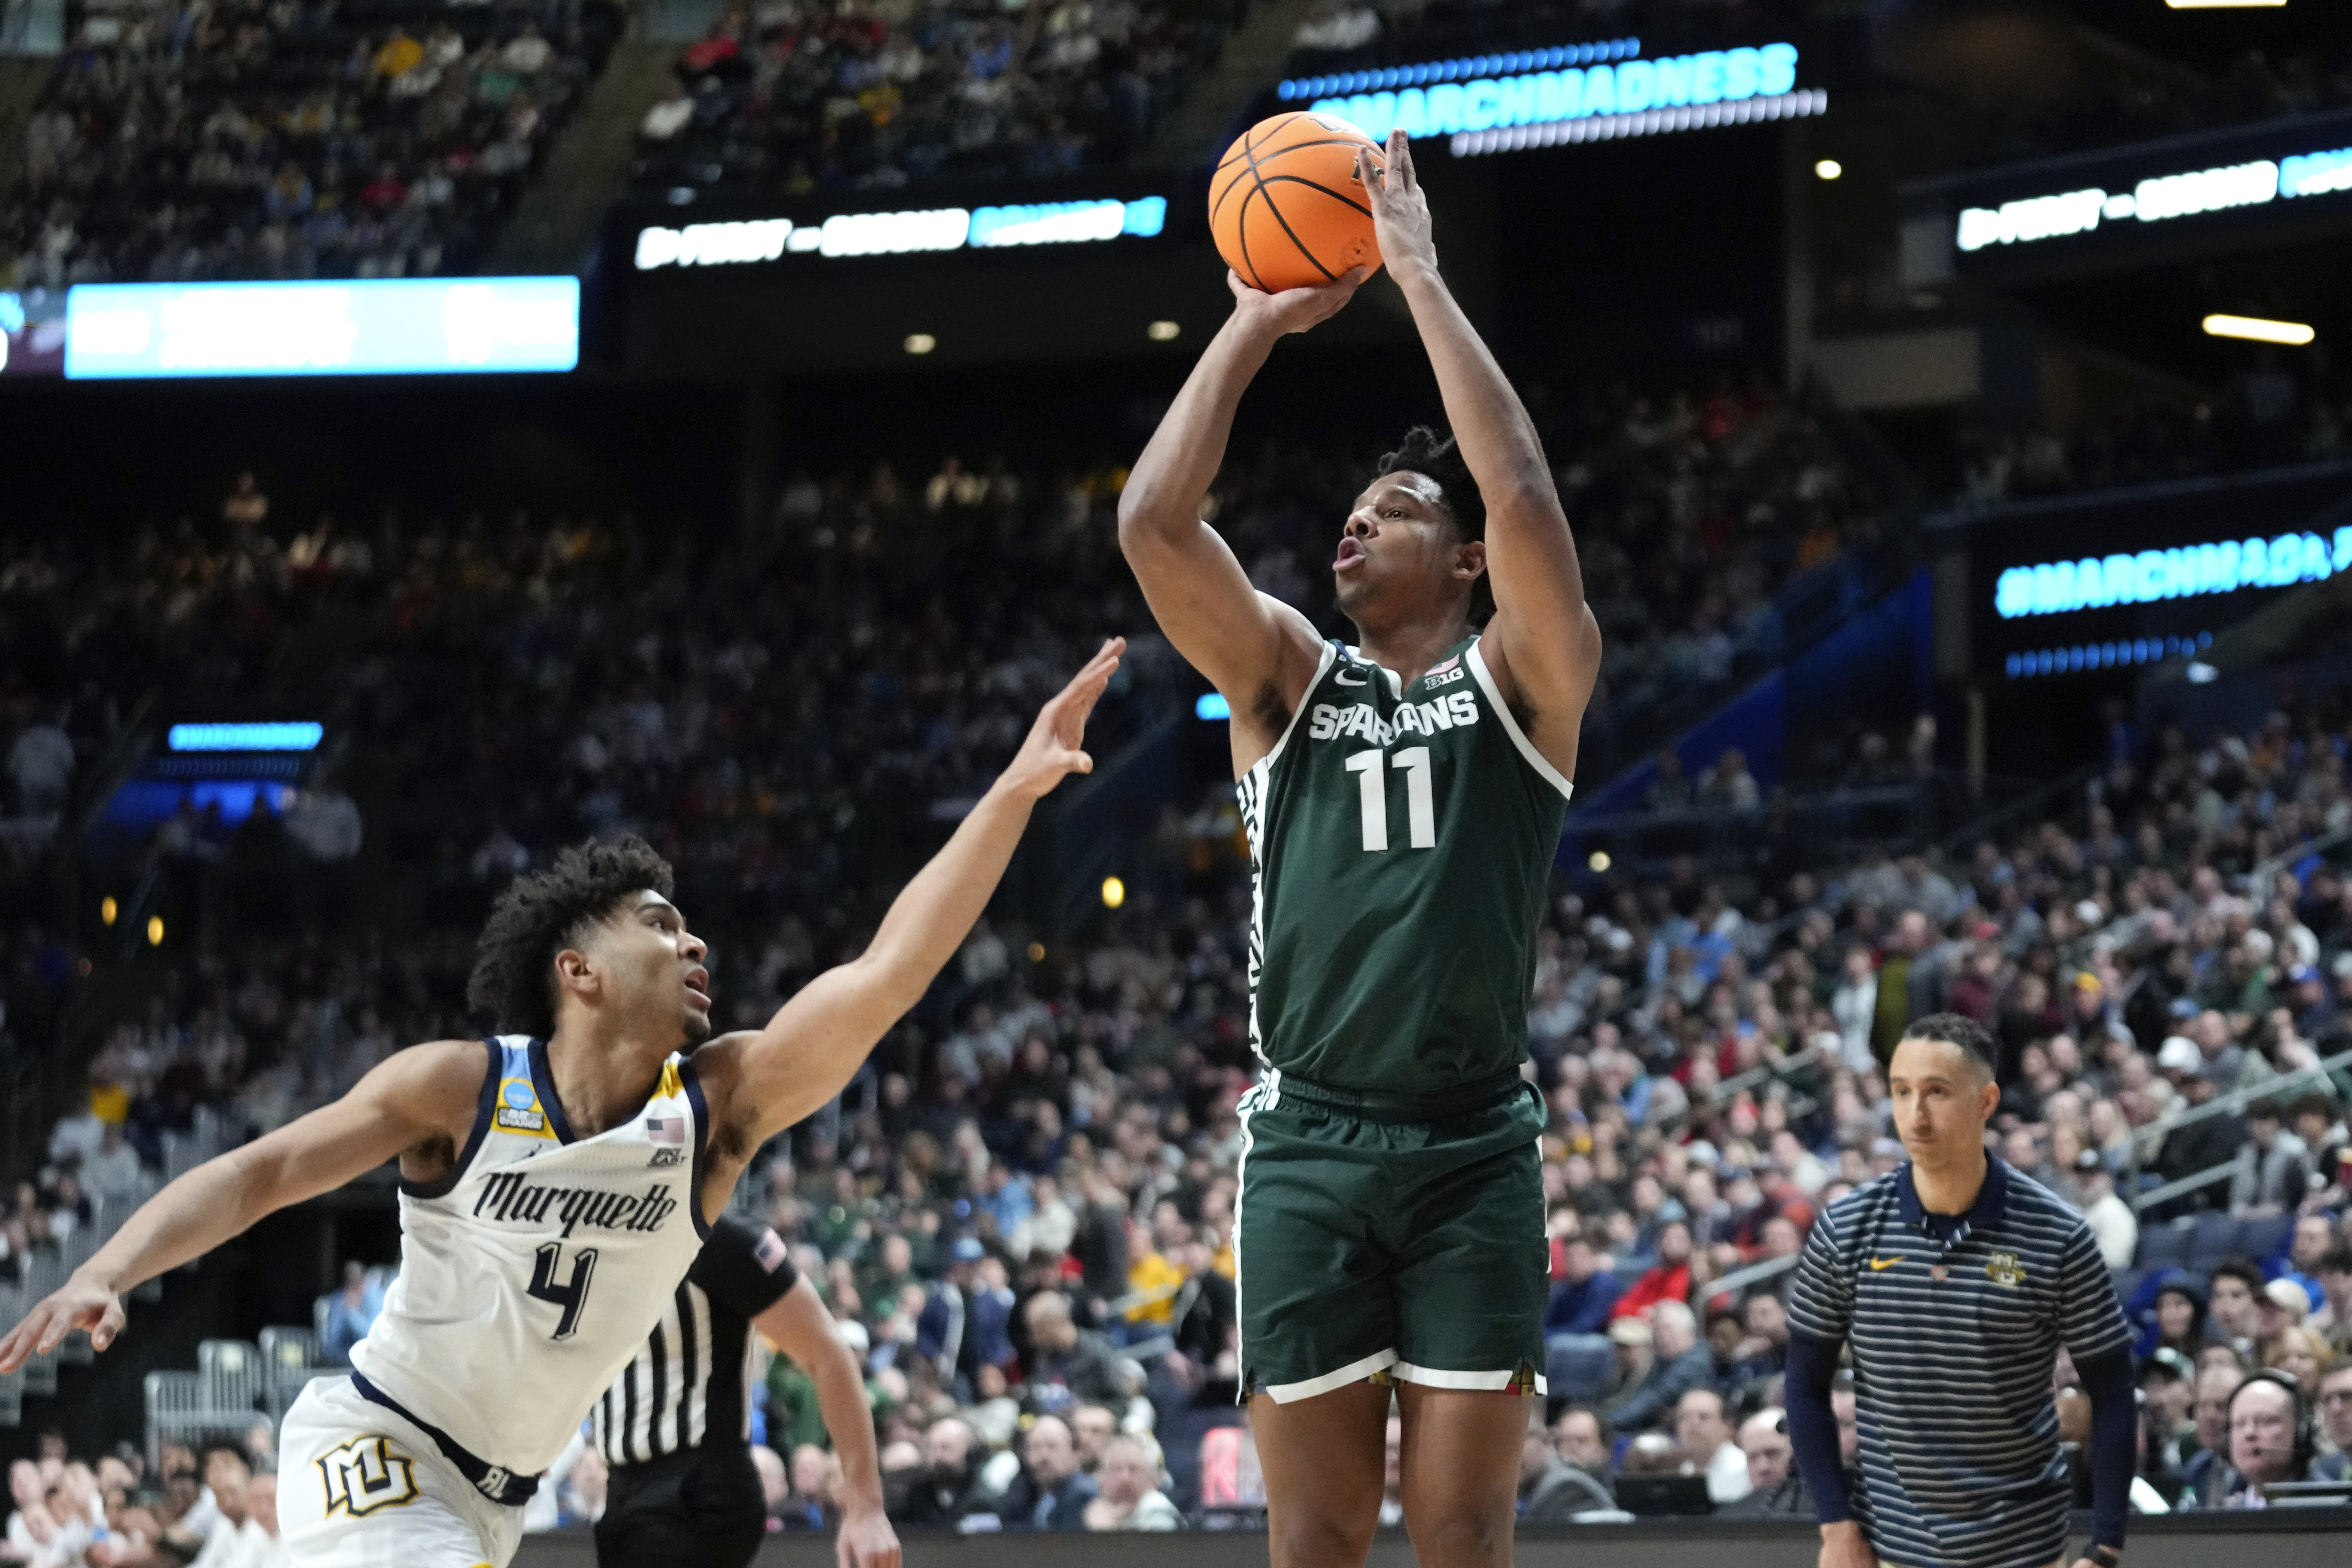 Michigan State pushes past Marquette to advance to Sweet 16 Live updates recap